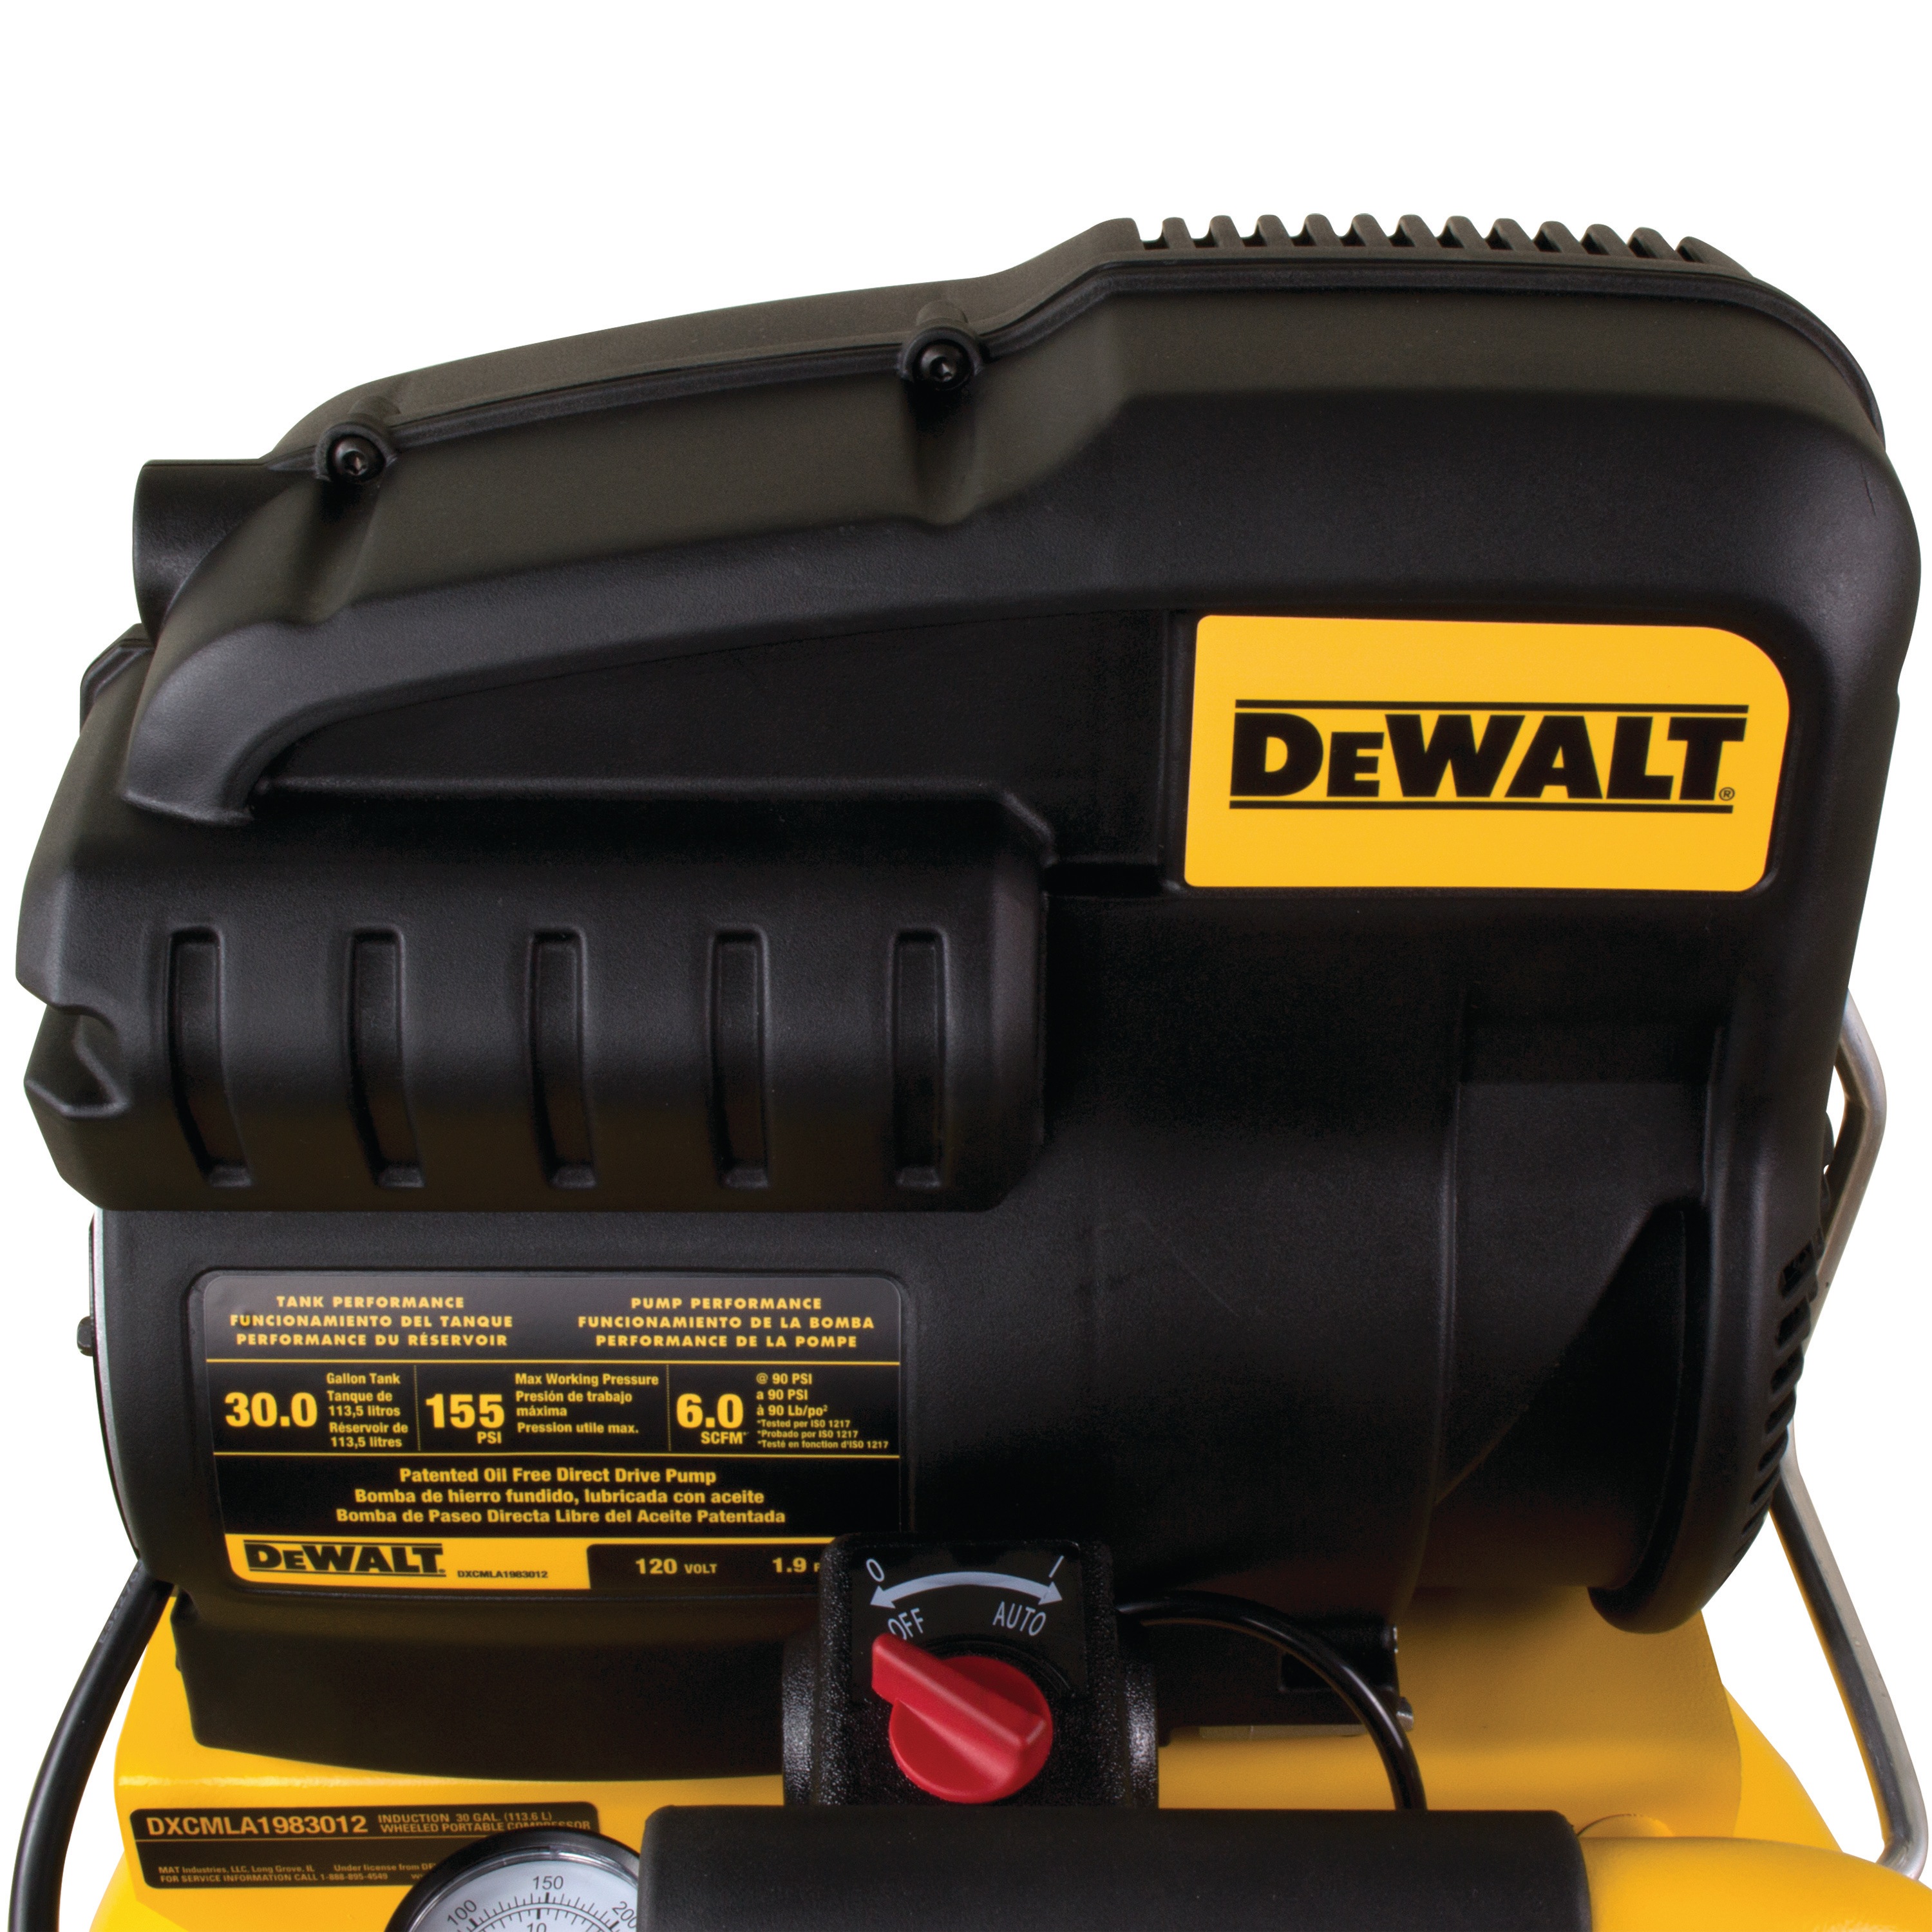 Patented oil free direct drive pump feature of 30 gallons Portable Electric Air Compressor.